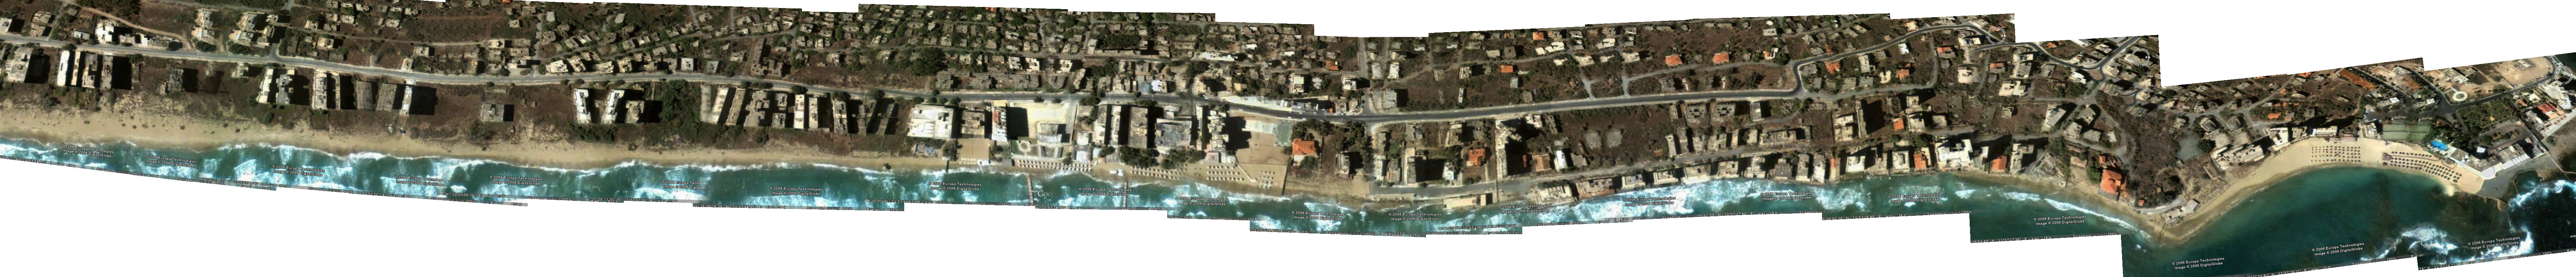 Google Earth images panorama